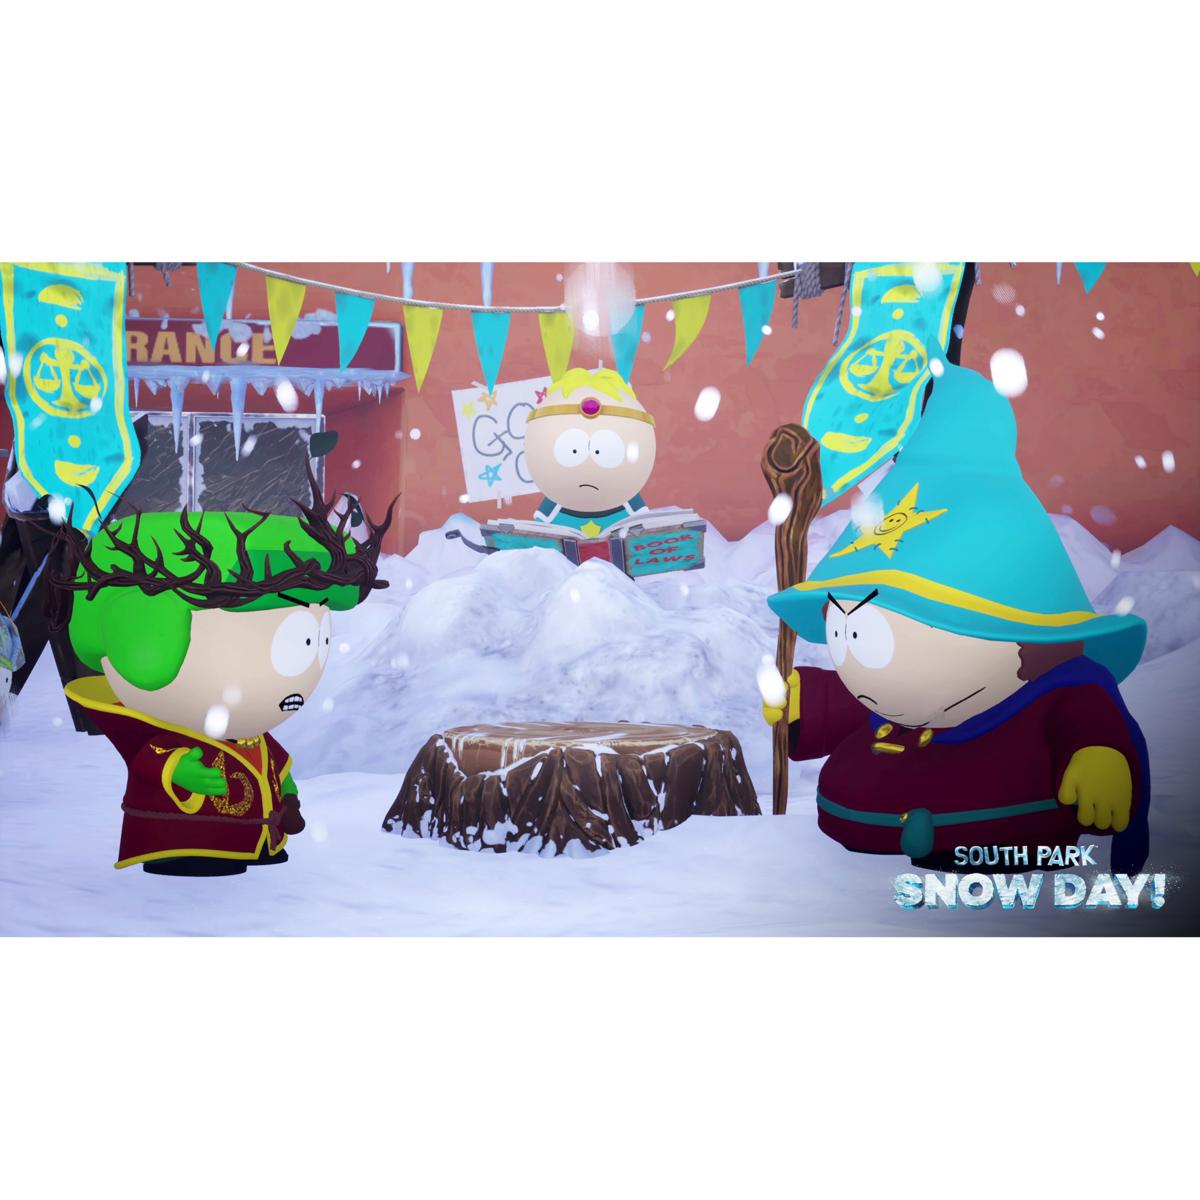 South Park: Snow Day! - PlayStation 5